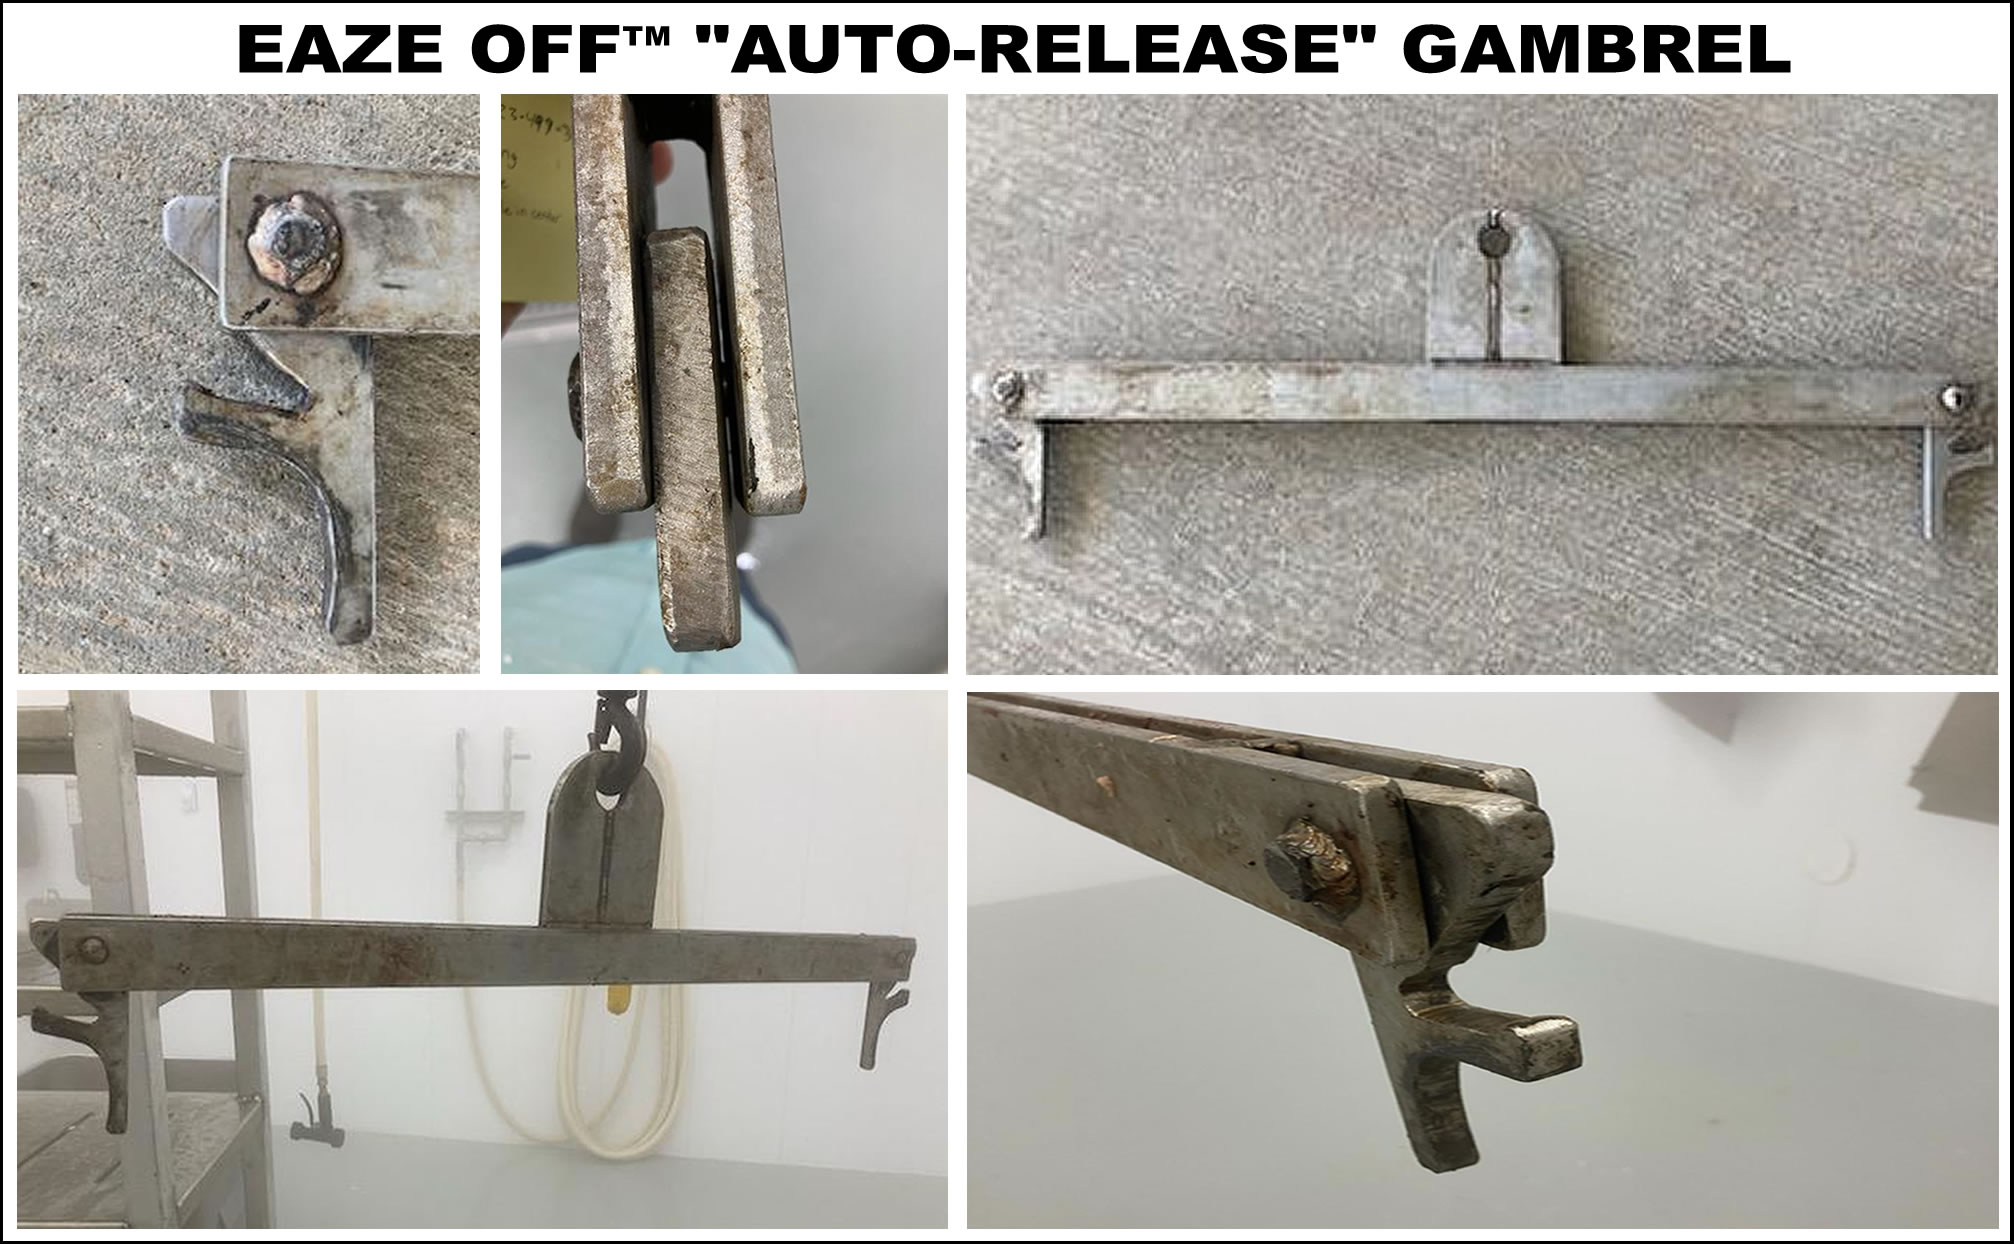 EAZE OFF Stainless Steel Auto-release Gambrel